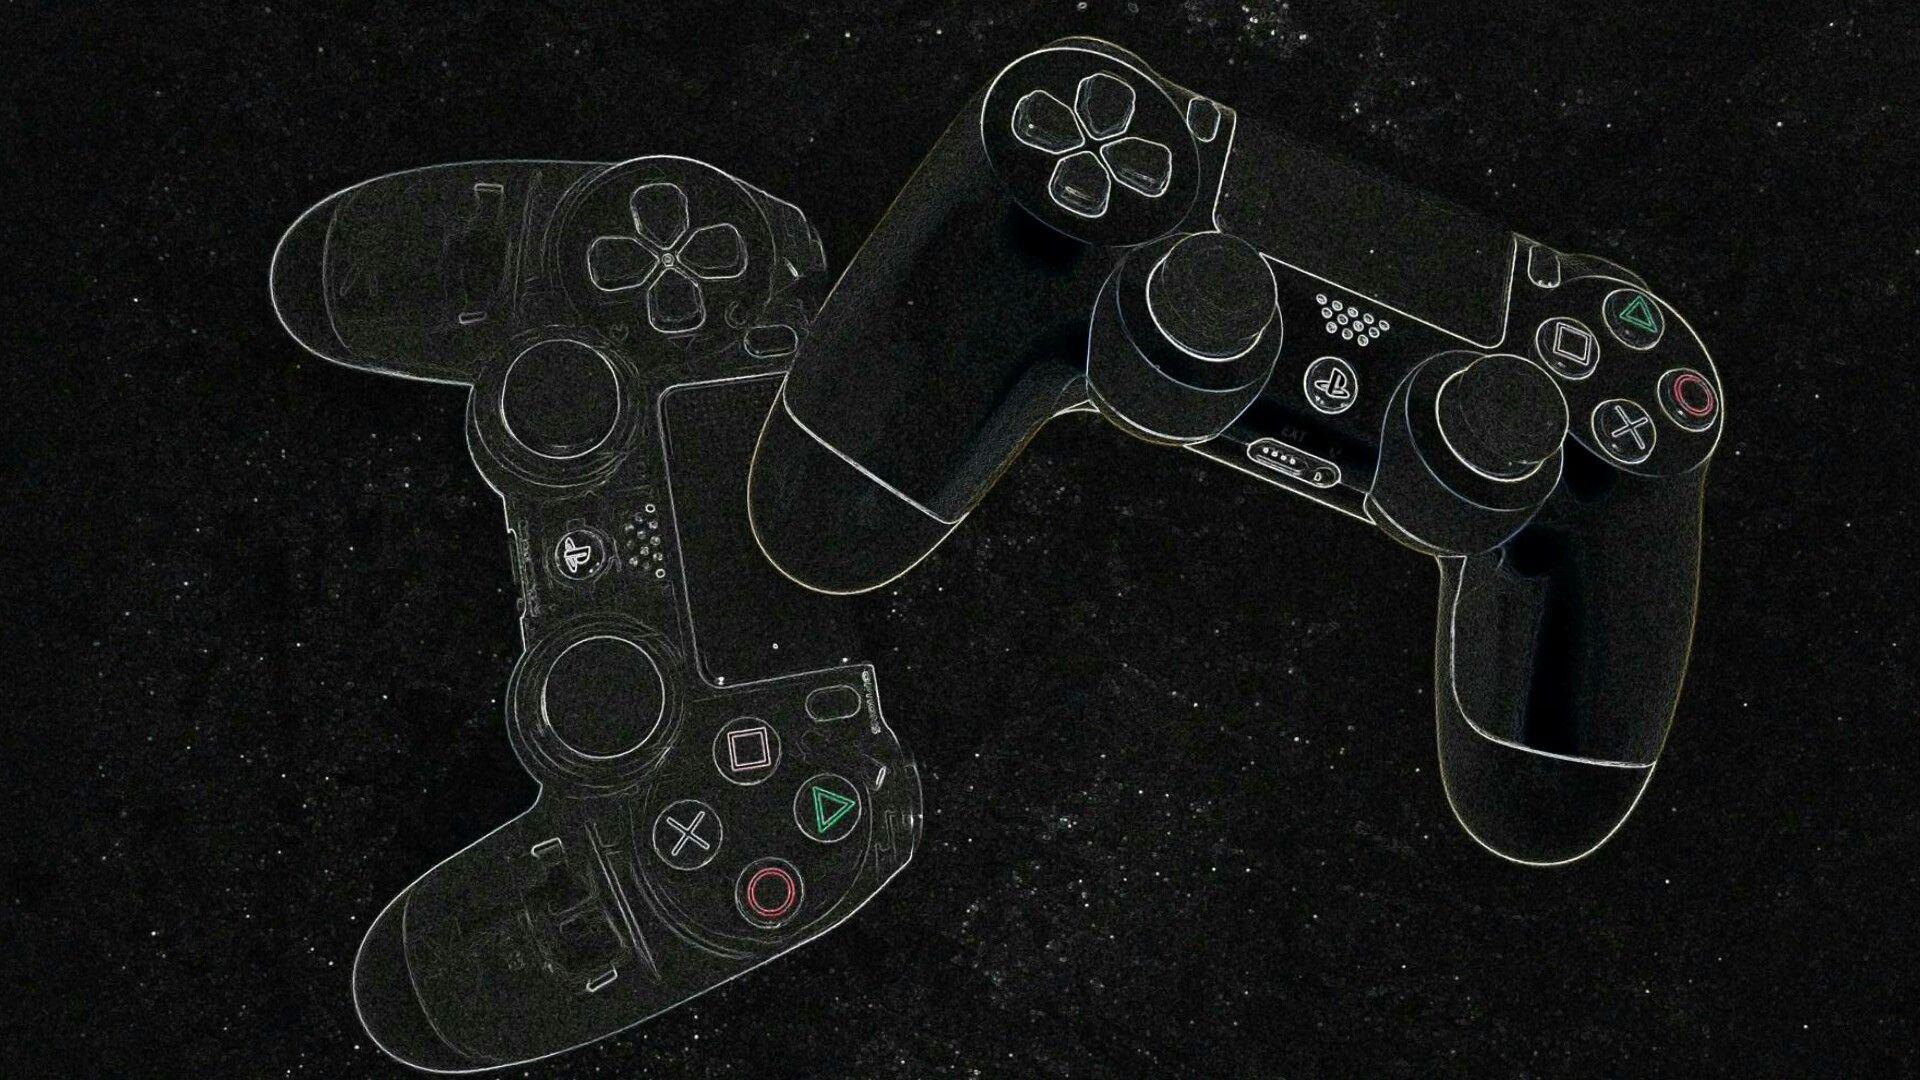 Ps4 Controller Pictures | Download Free Images on Unsplash